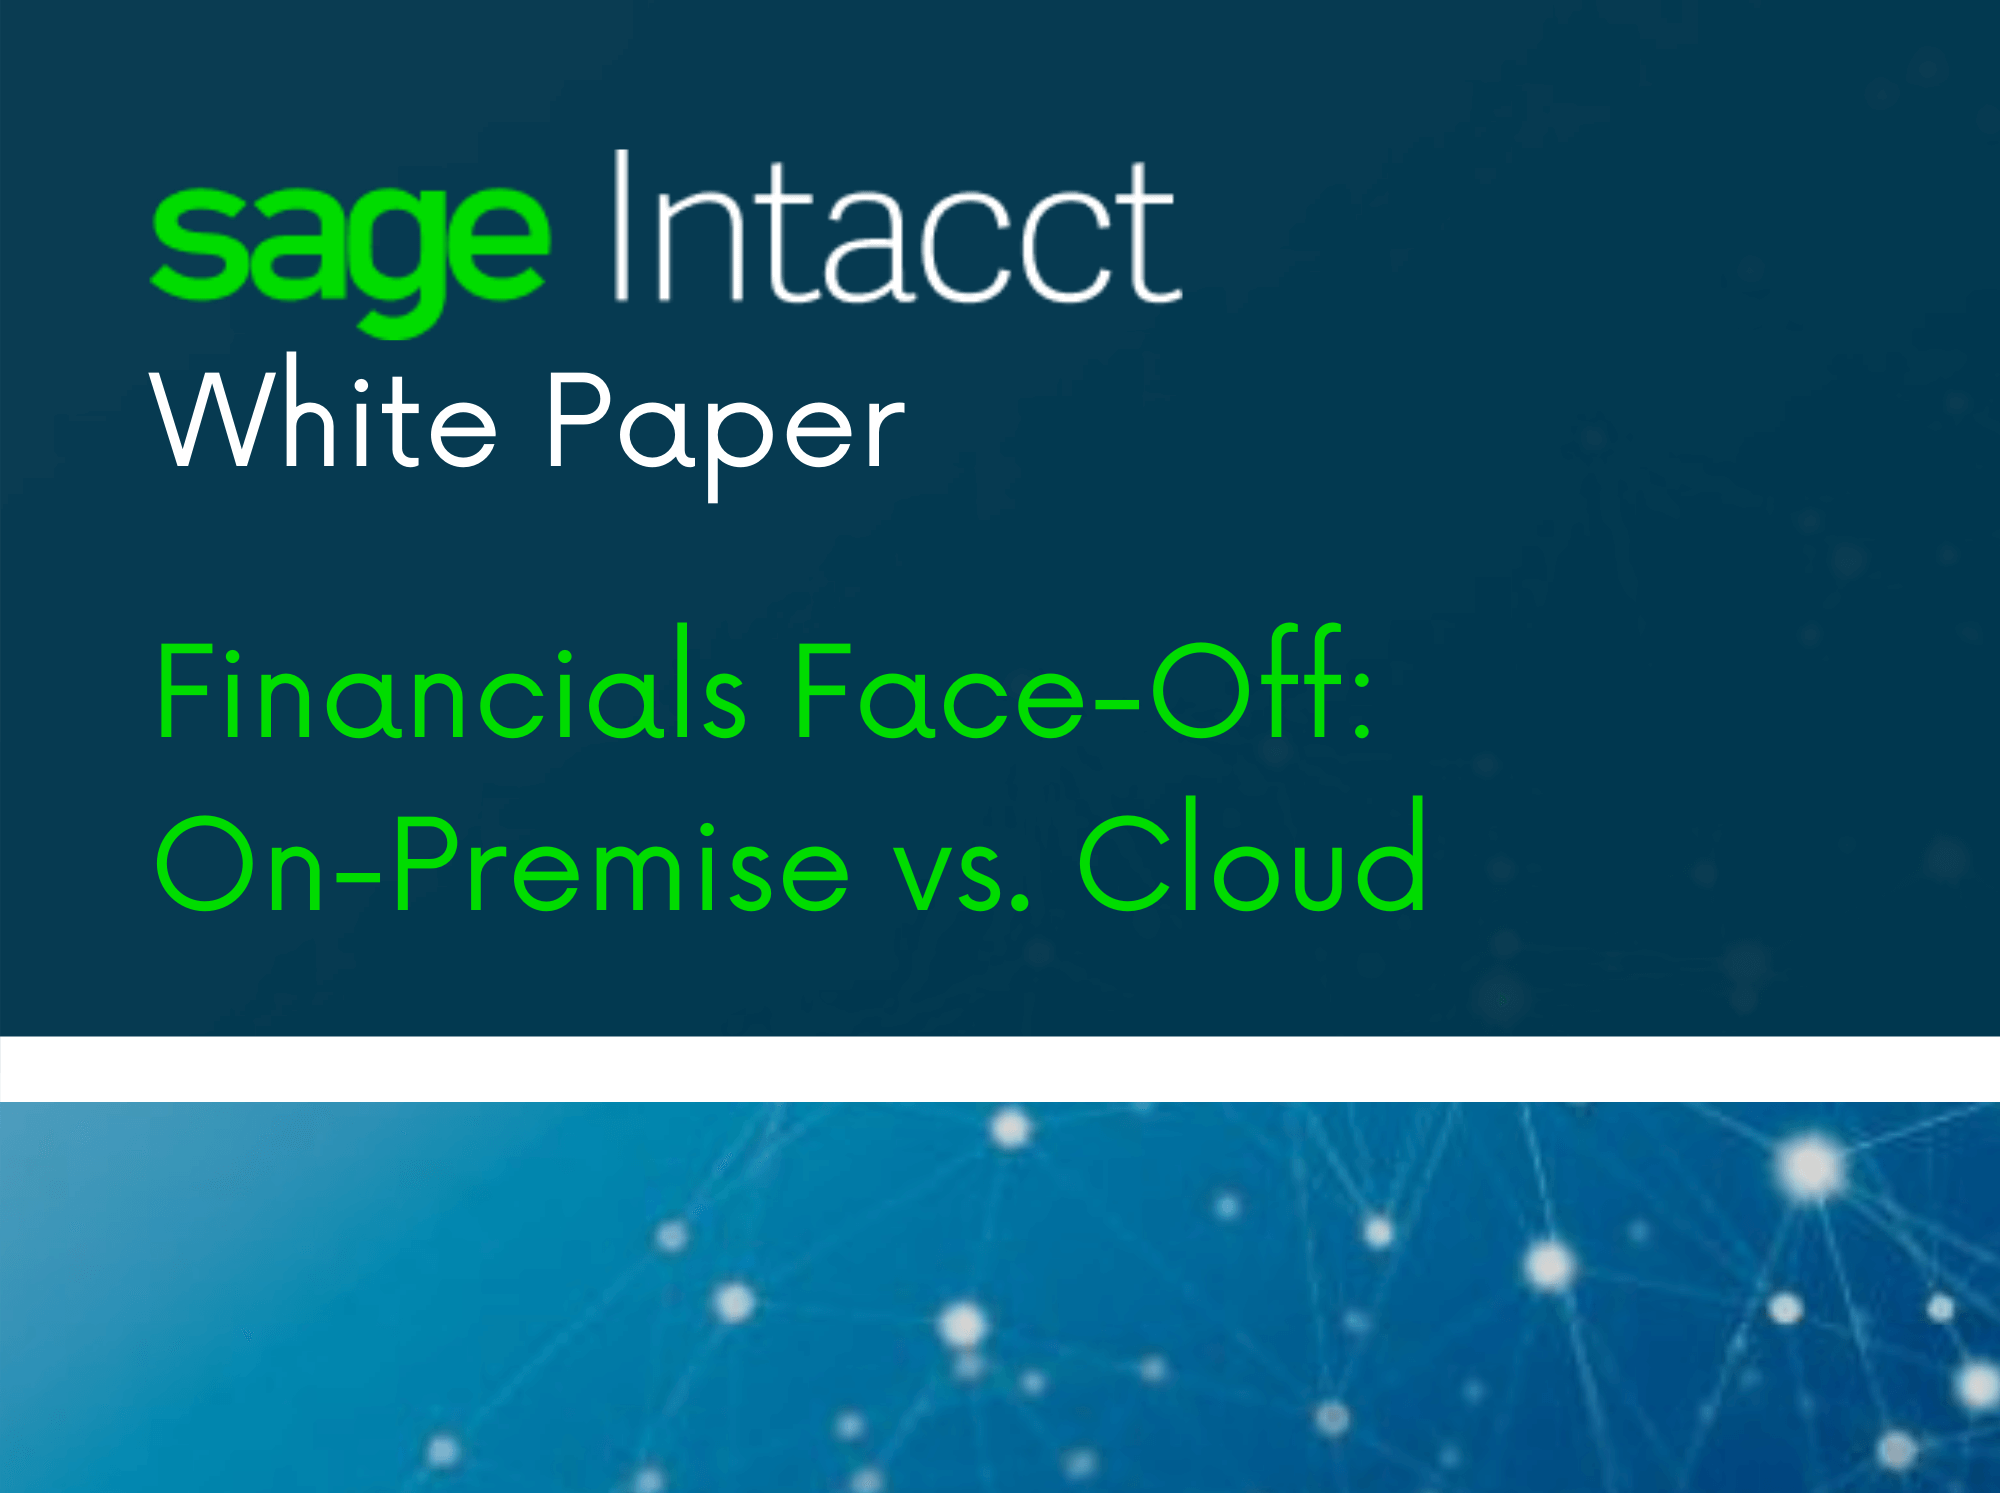 Sage Intacct White Paper: Financials Face-off; On-Premise vs. Cloud